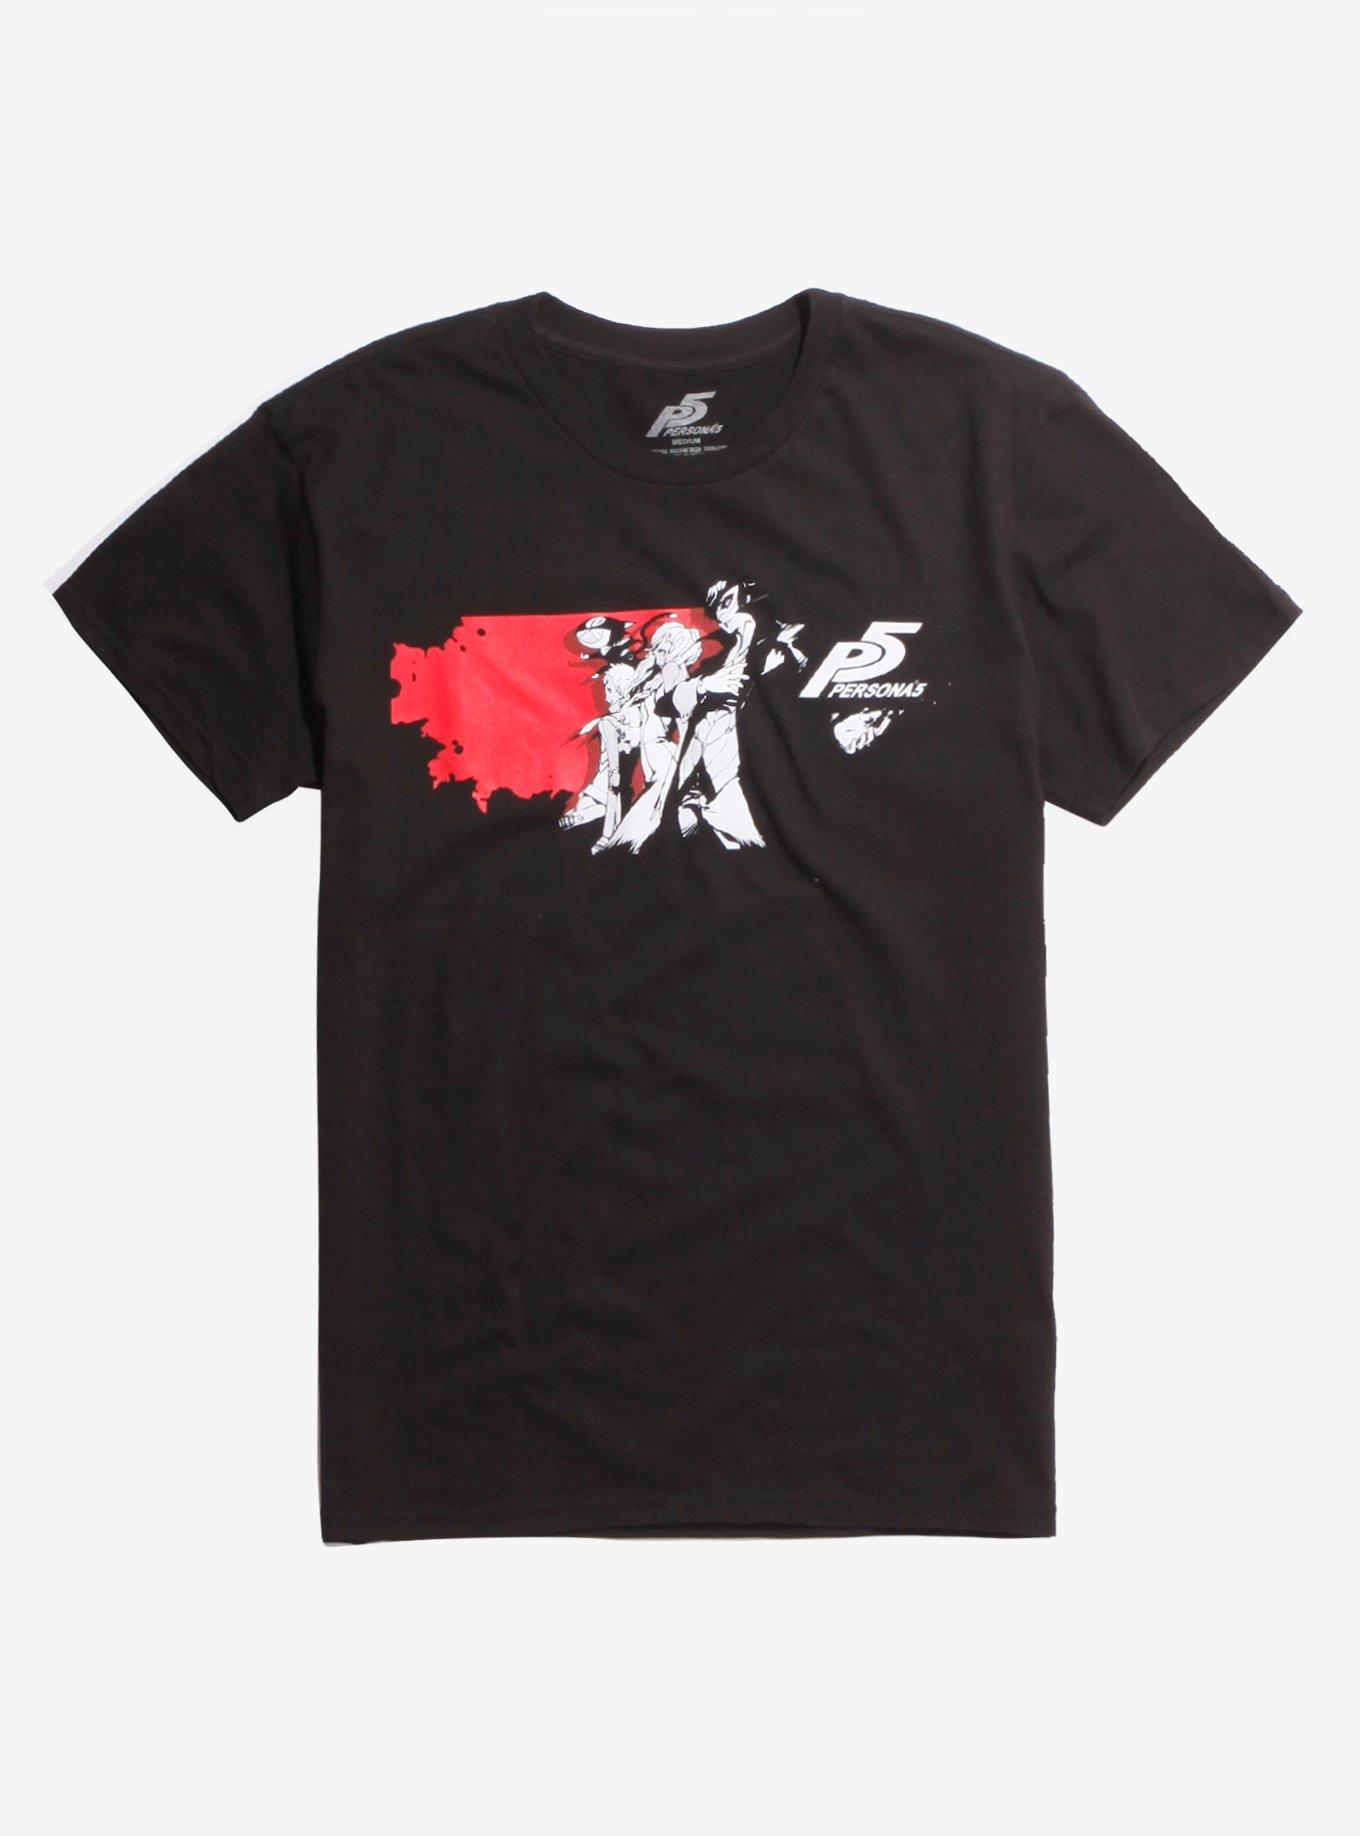 Persona 5 Group T-Shirt | Hot Topic